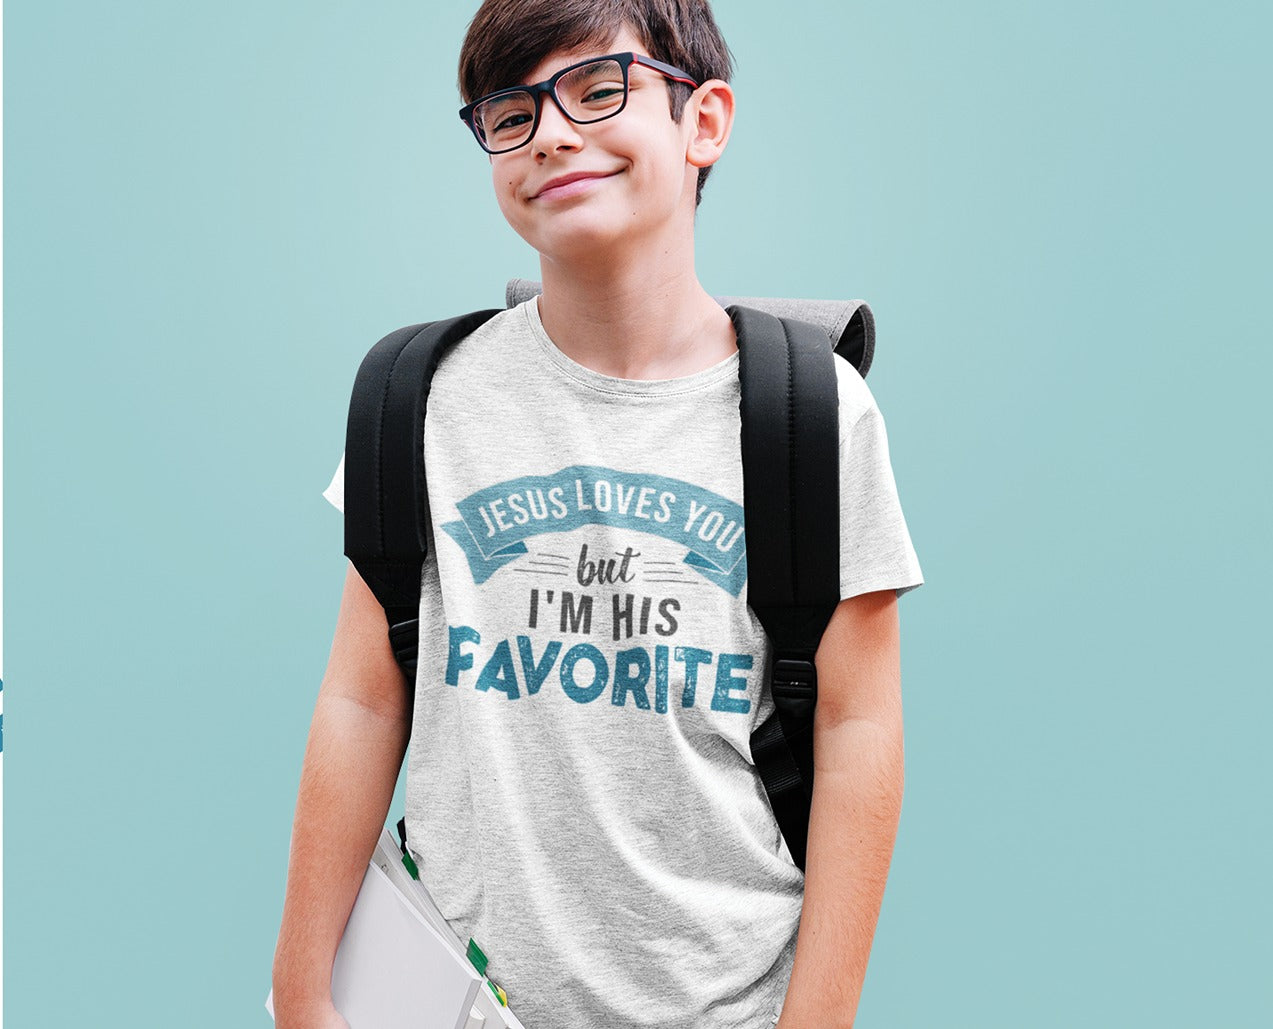 Jesus Loves You But I'm His Favorite funny Christian aesthetic youth size t-shirt printed in teal on soft heather gray boys and girls kids tee